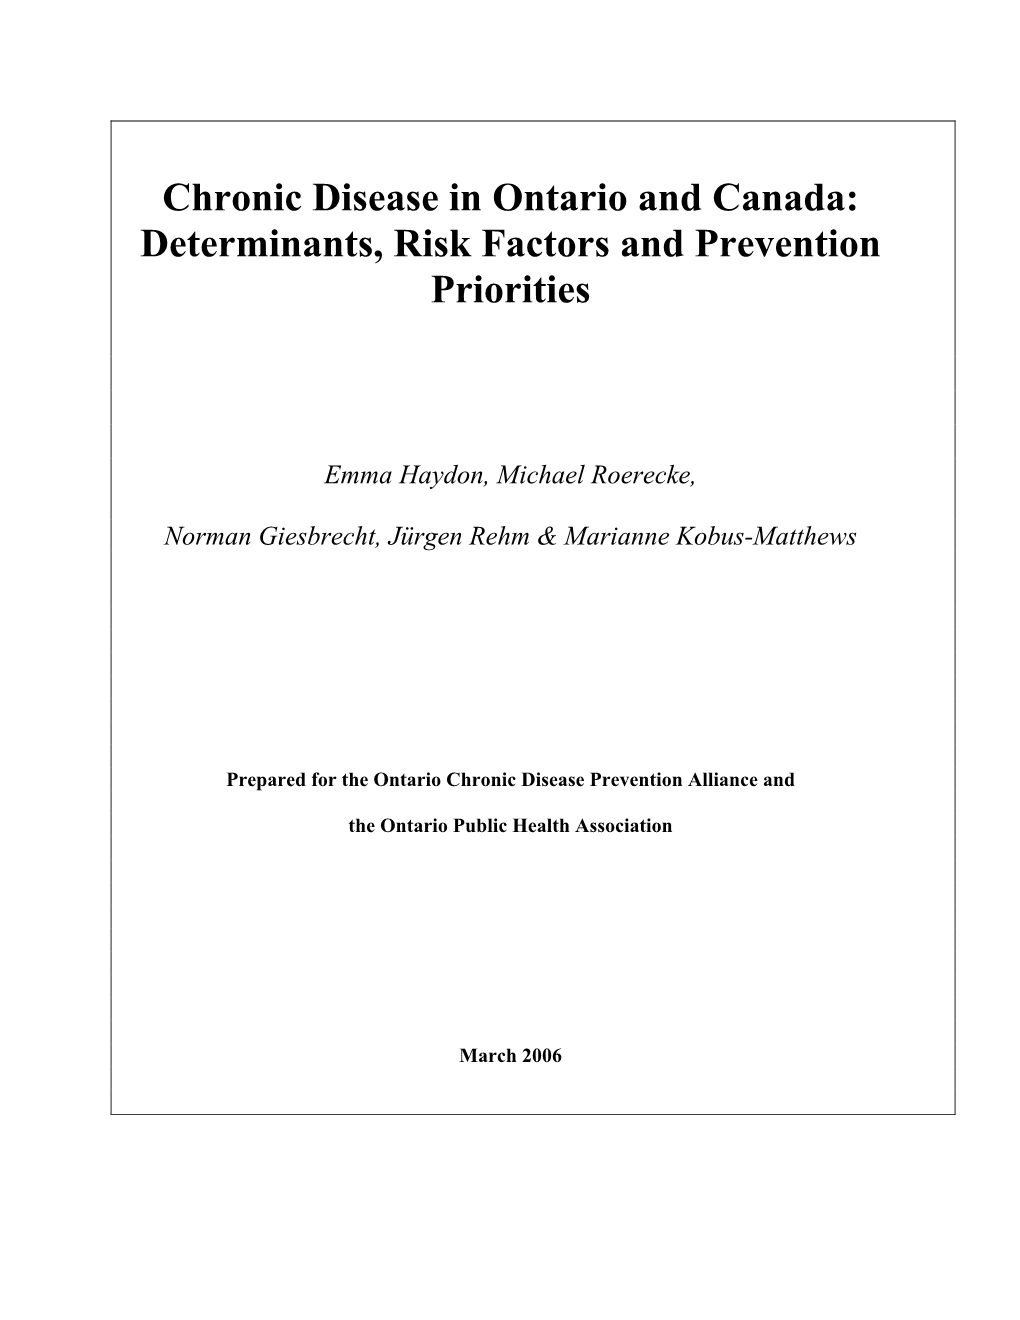 Chronic Disease in Ontario and Canada: Determinants, Risk Factors and Prevention Priorities